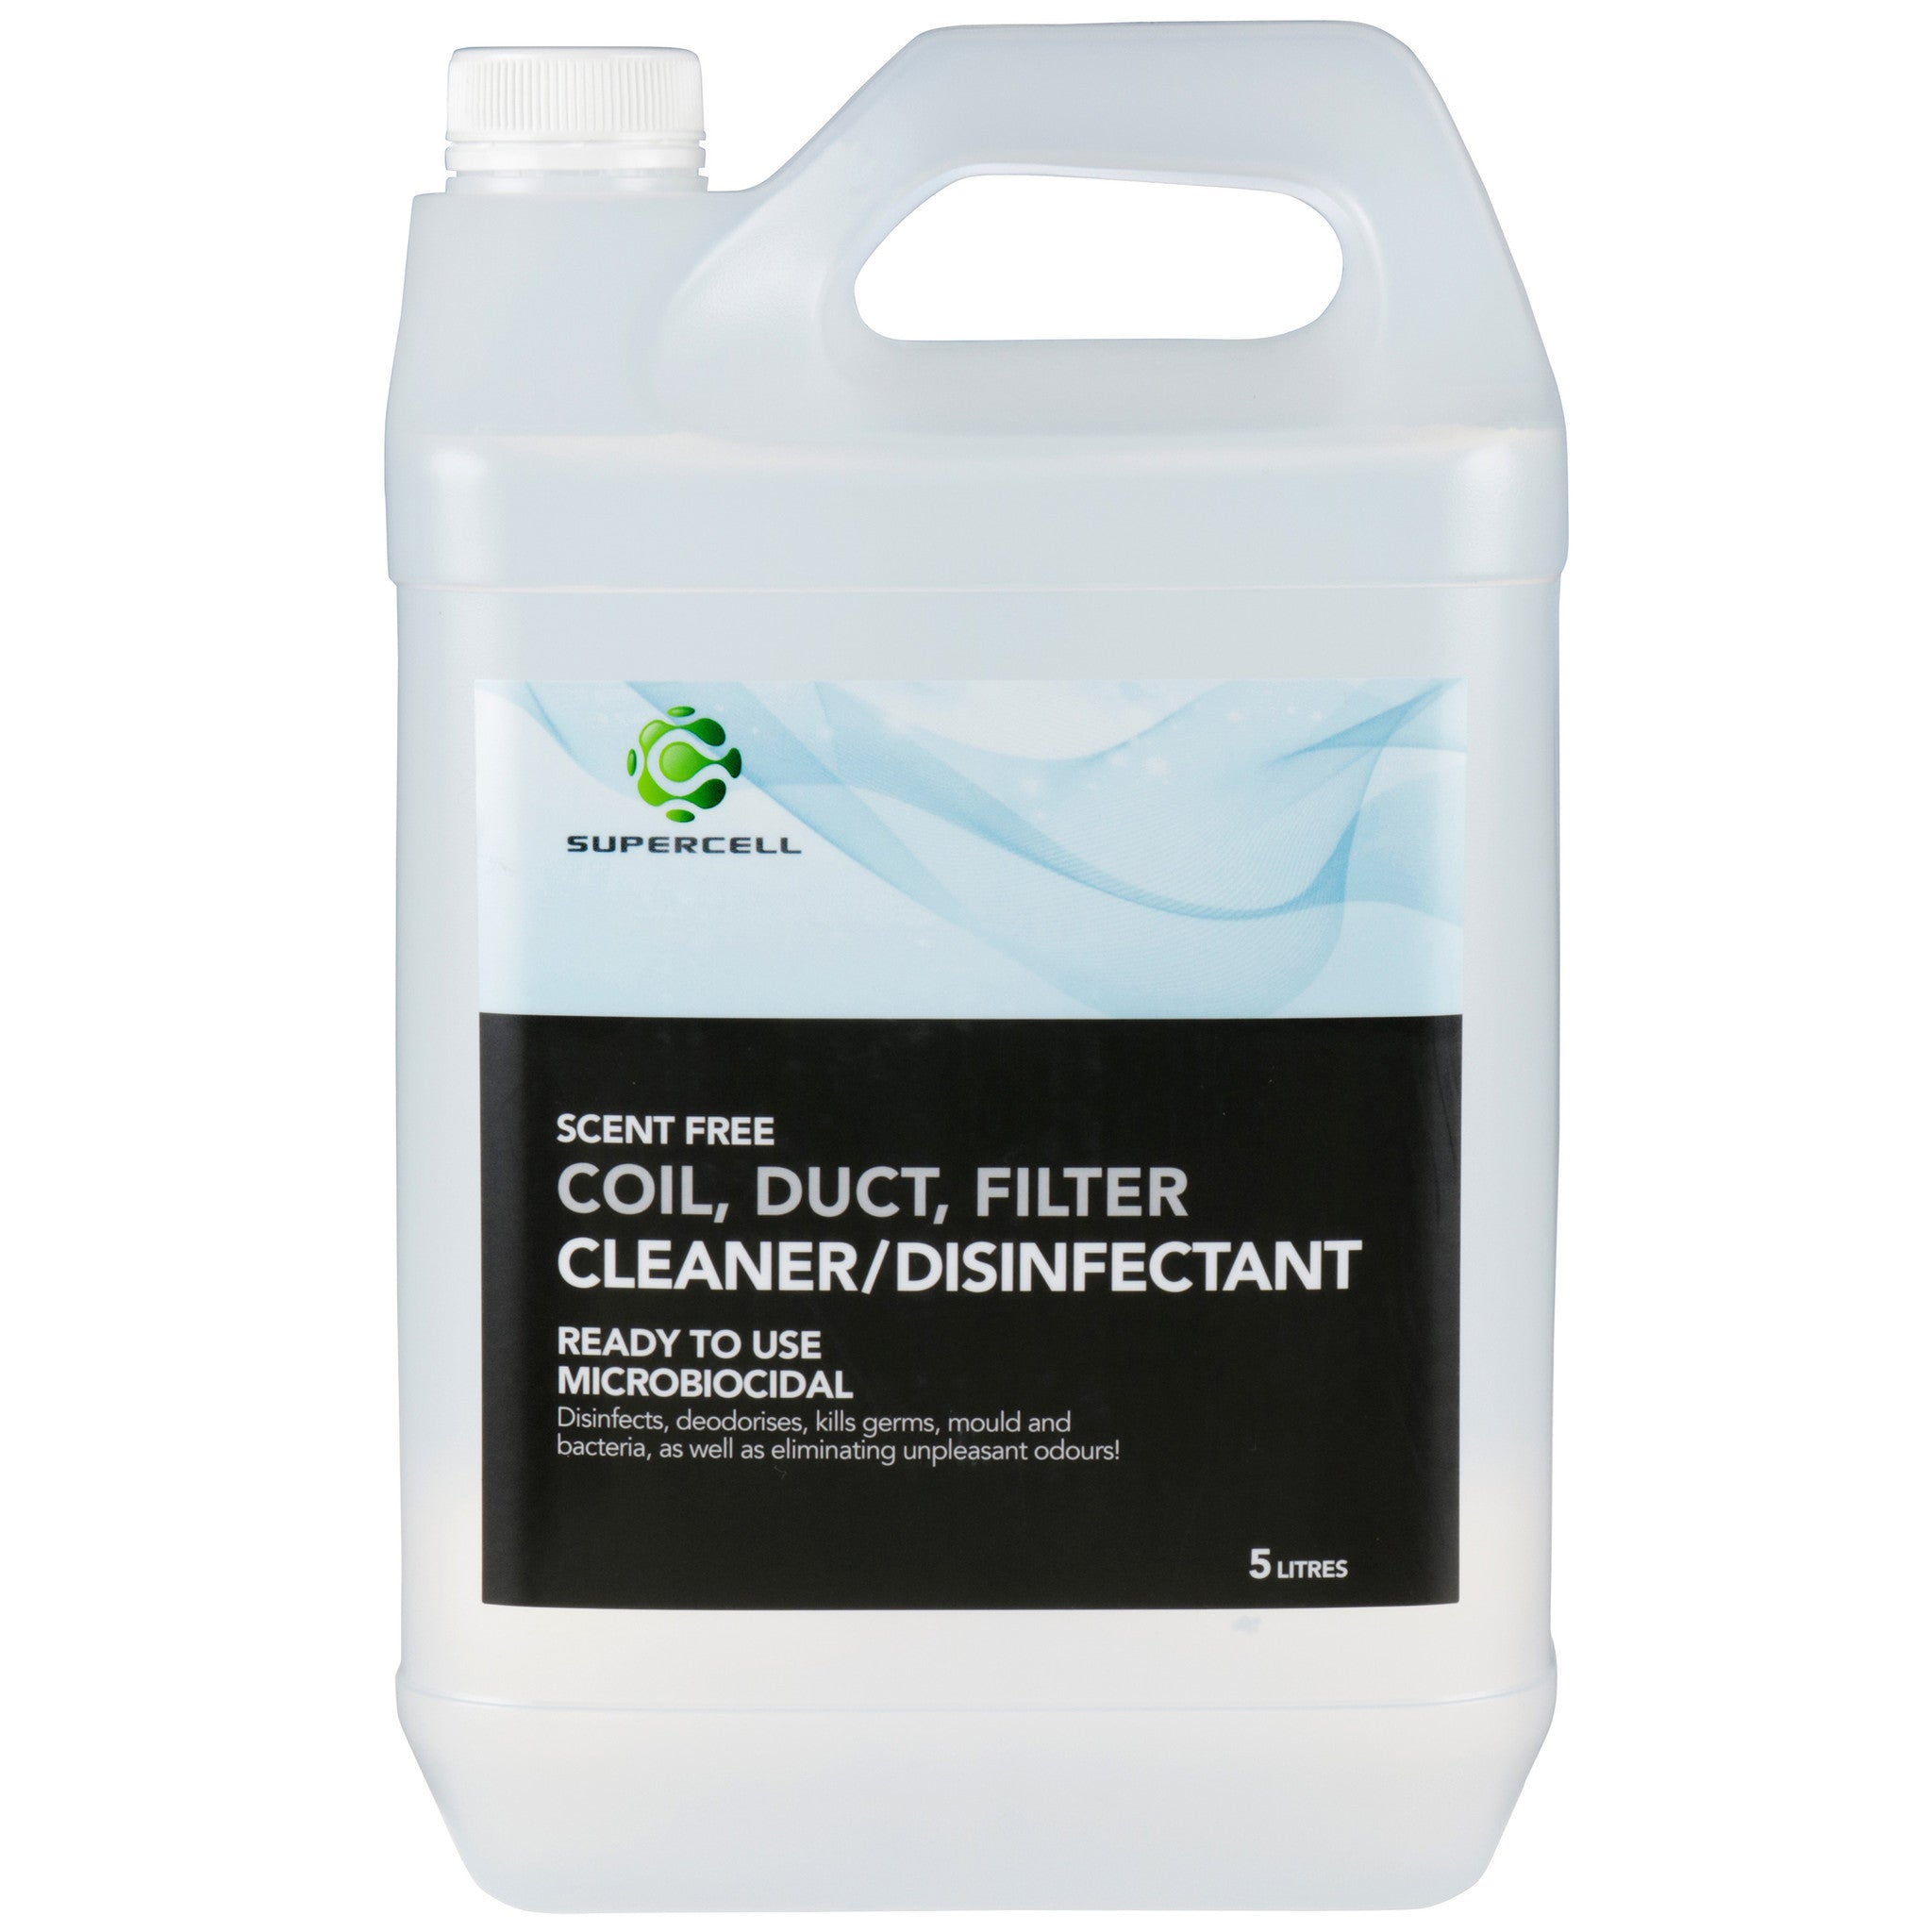 Supercell Coil Duct & Filter  Cleaner Disinfectant 5 ltr  SCENT FREE